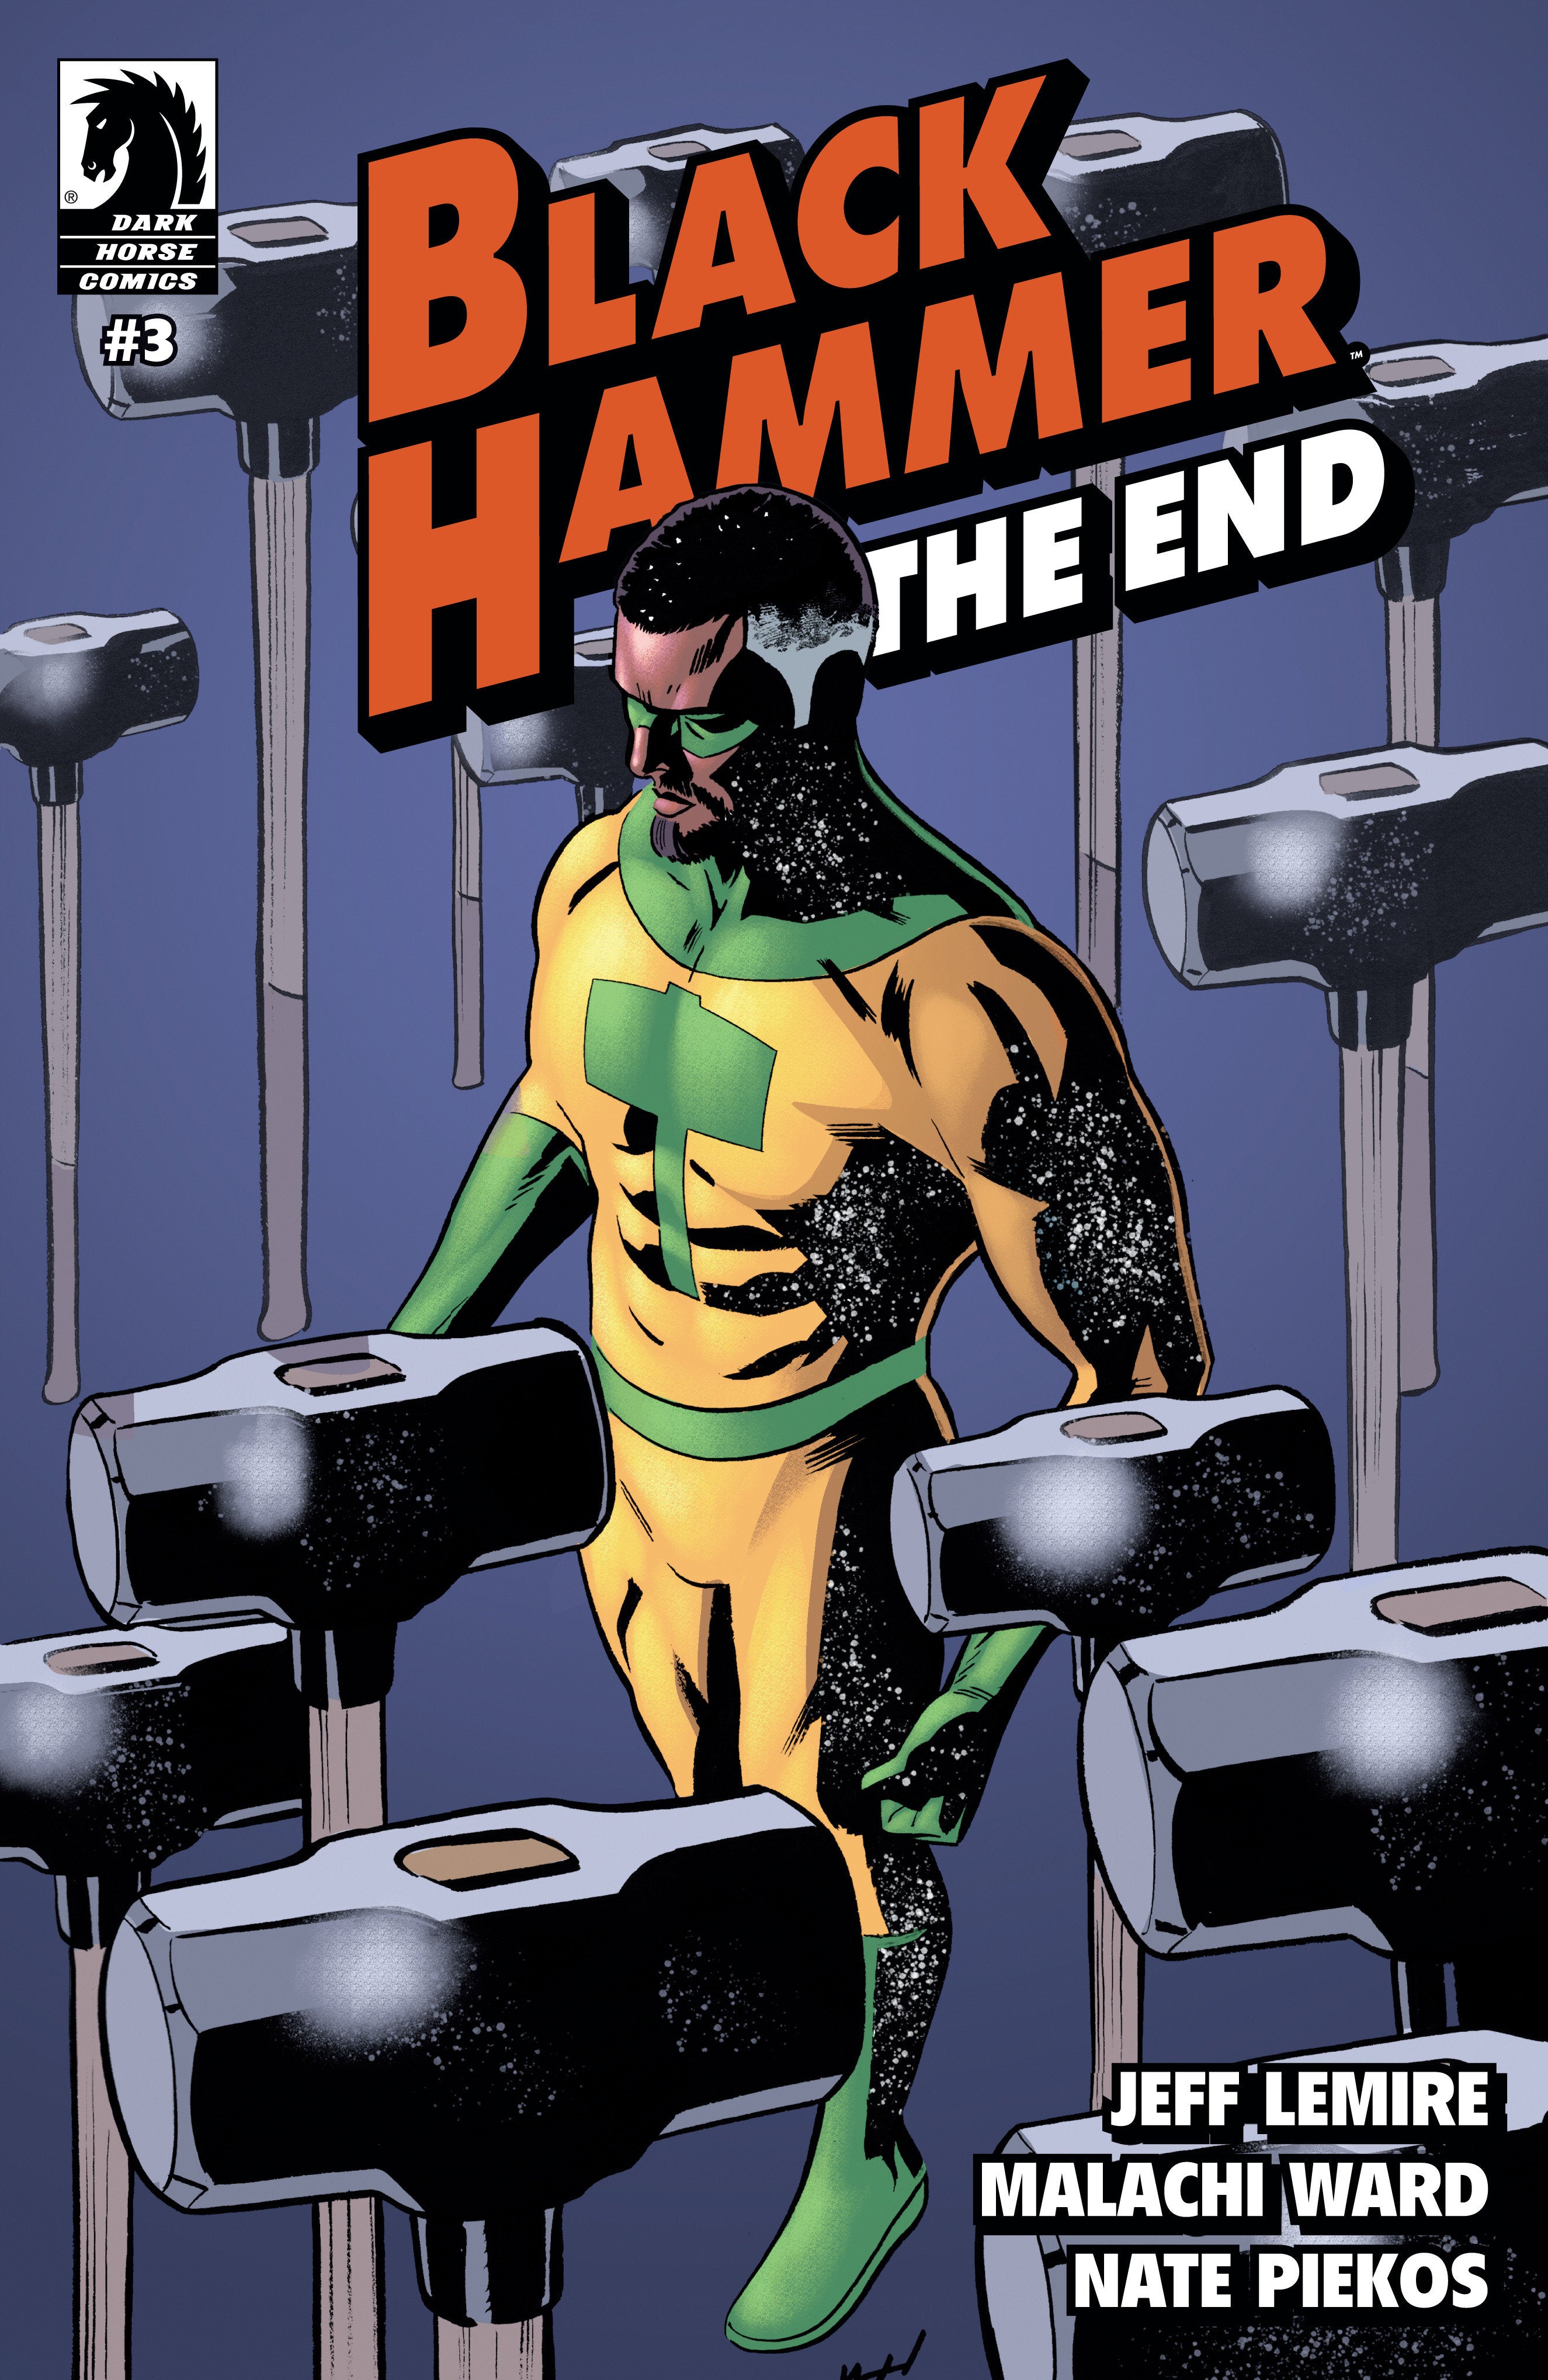 Black Hammer: The End #3 (Cover B) (Wilfredo Torres)